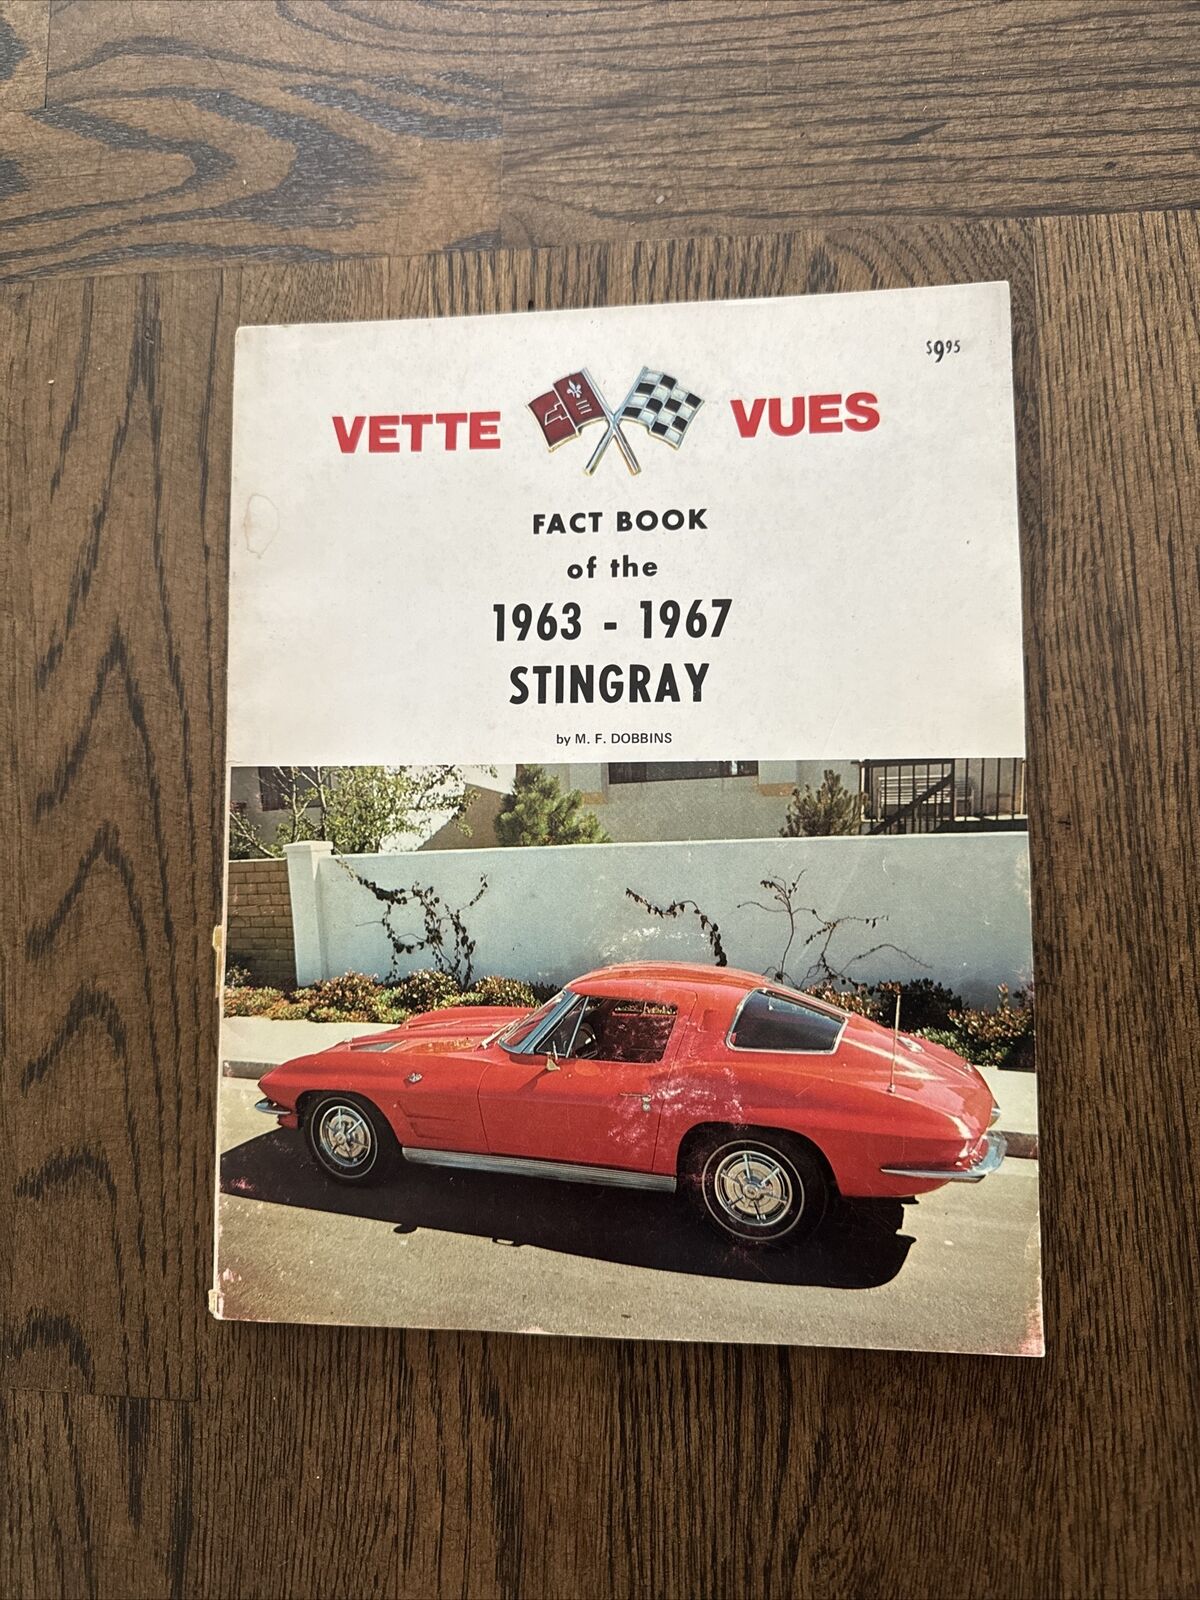 VETTE VUES FACT BOOK 1963-1967 STINGRAY DOBBINS ILLUSTRATED Softcover